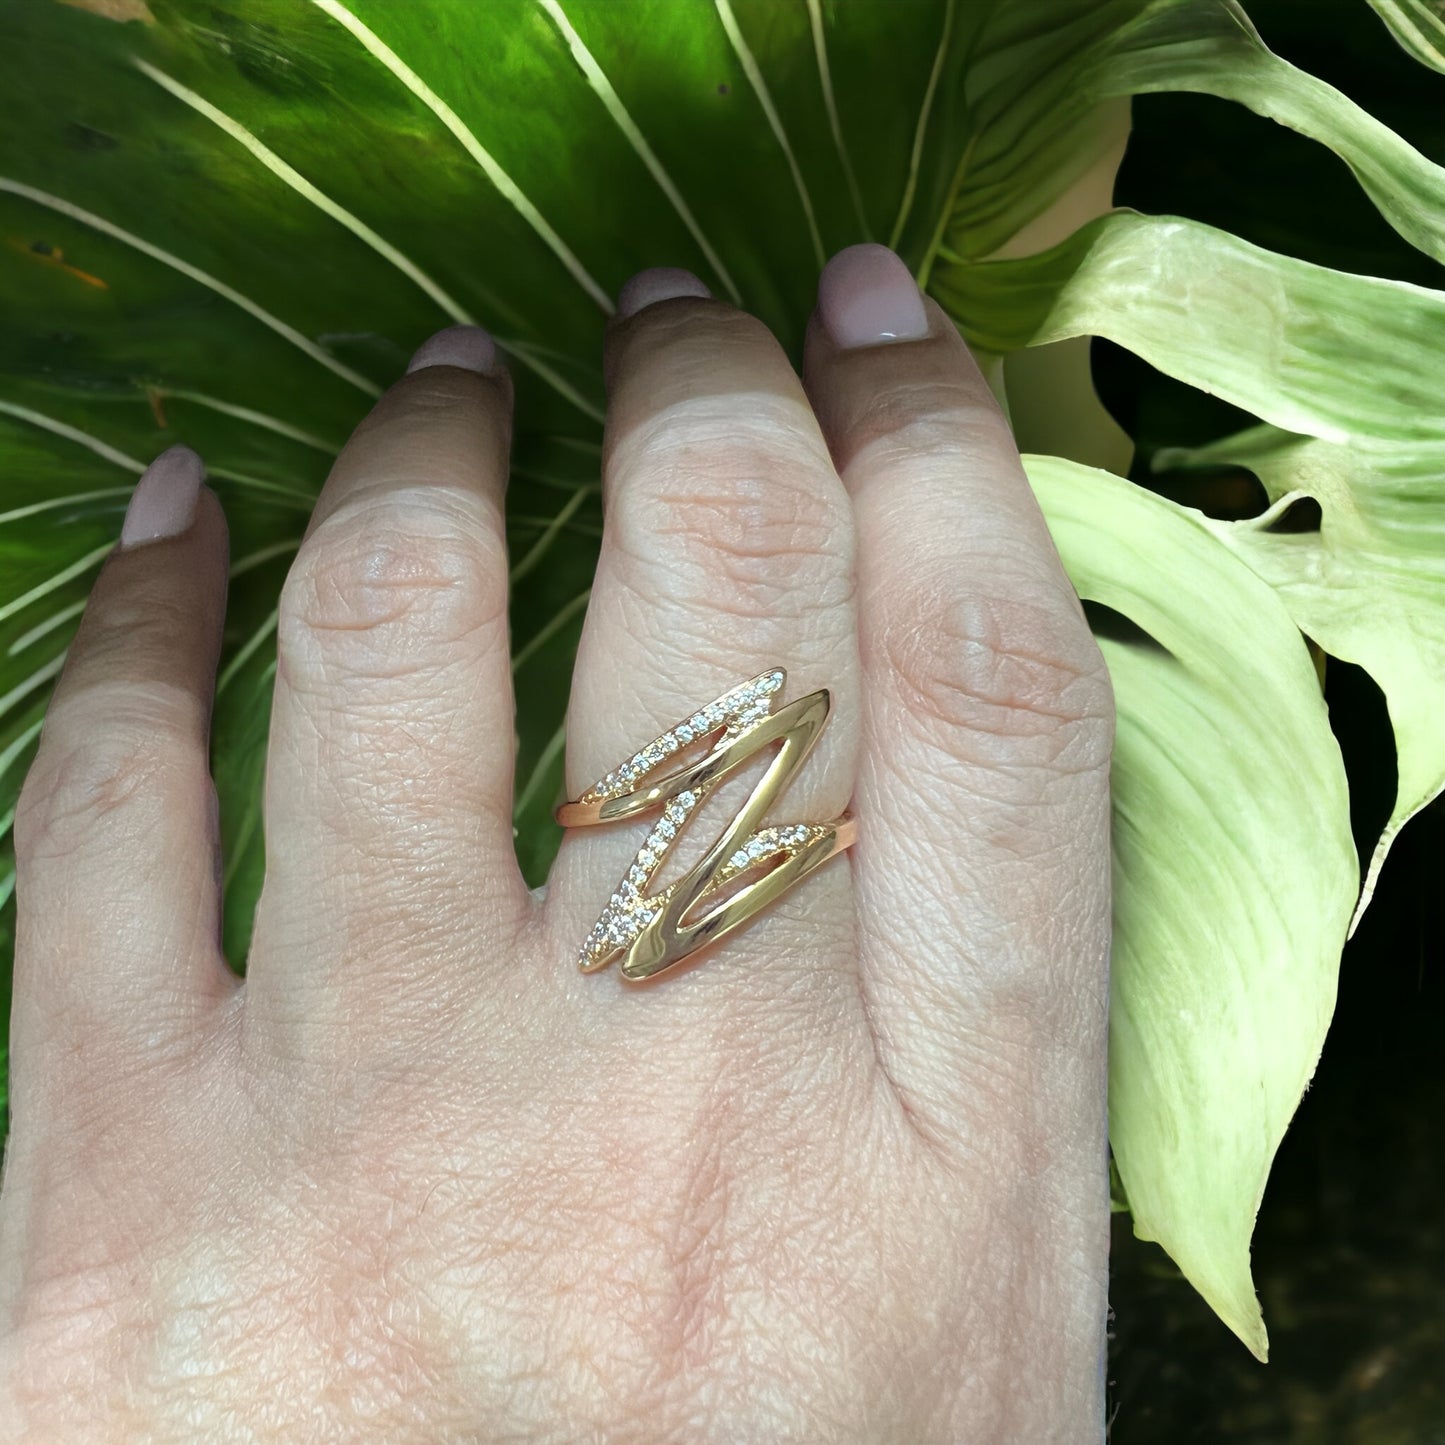 Zigzag 18k Gold Rings With White Stones For Women